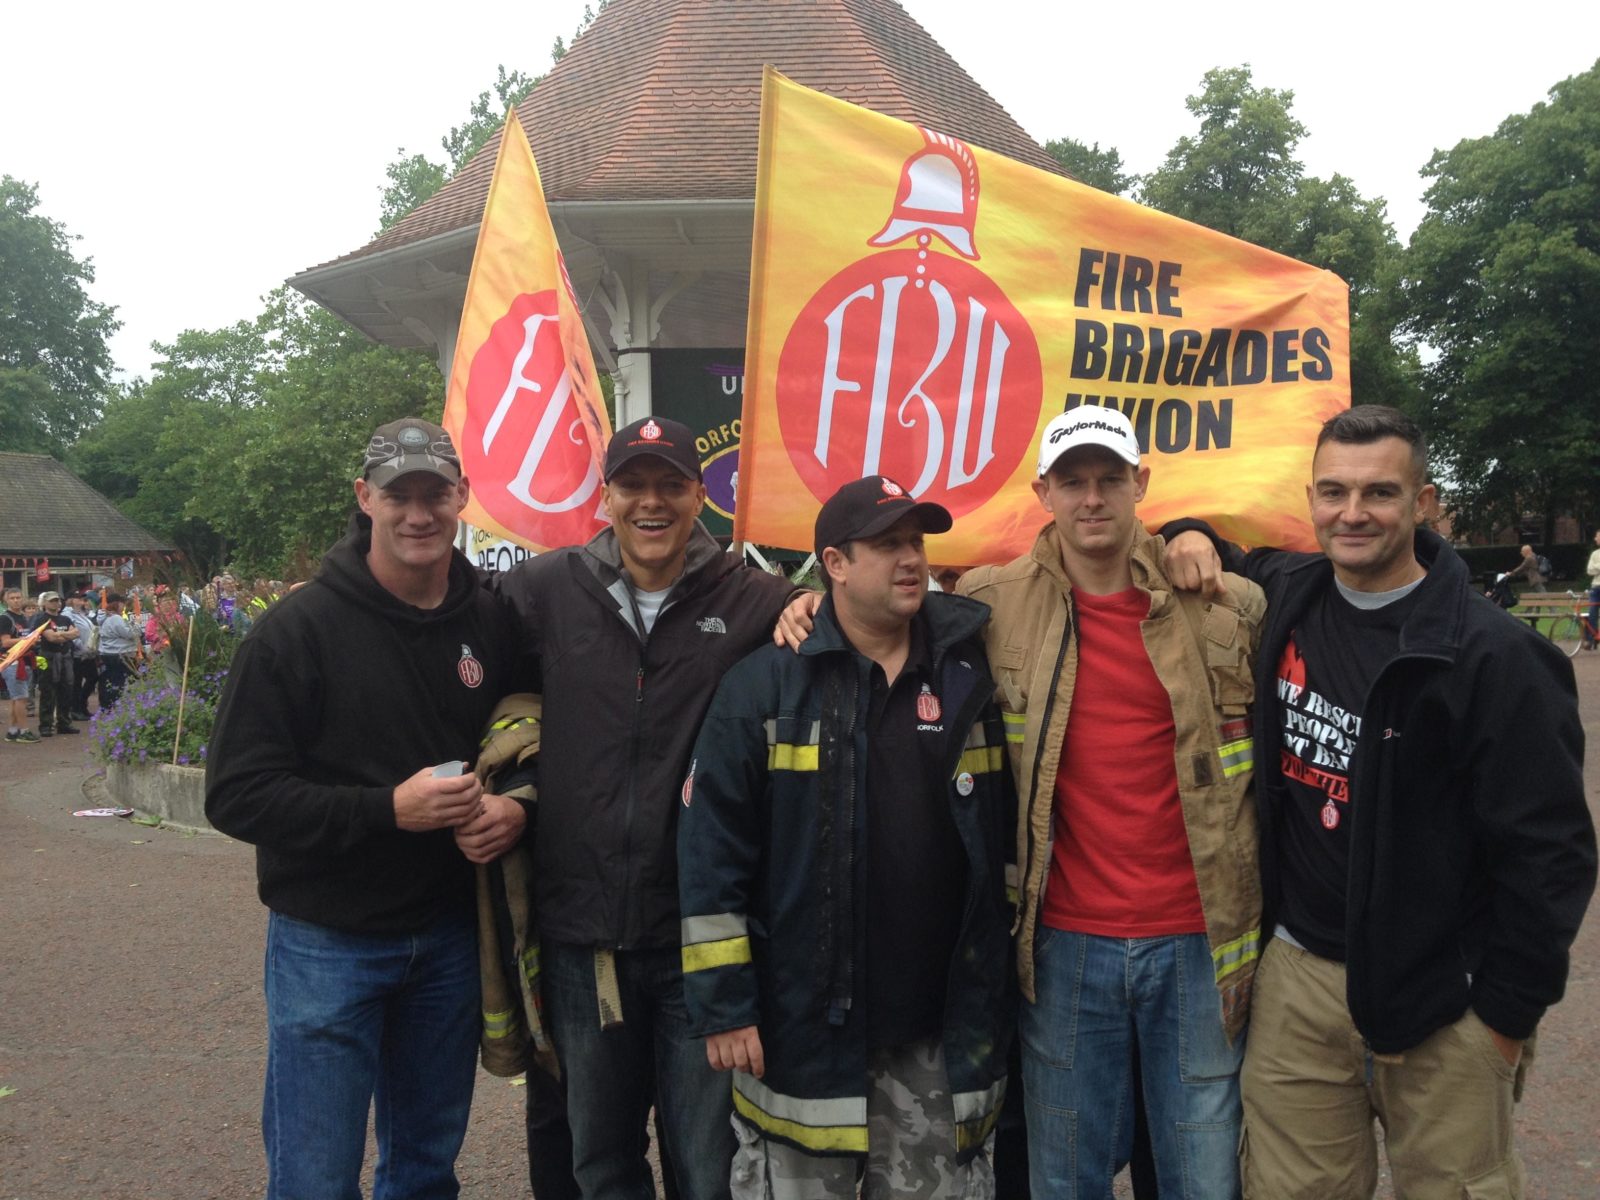 Clive with local FBU members